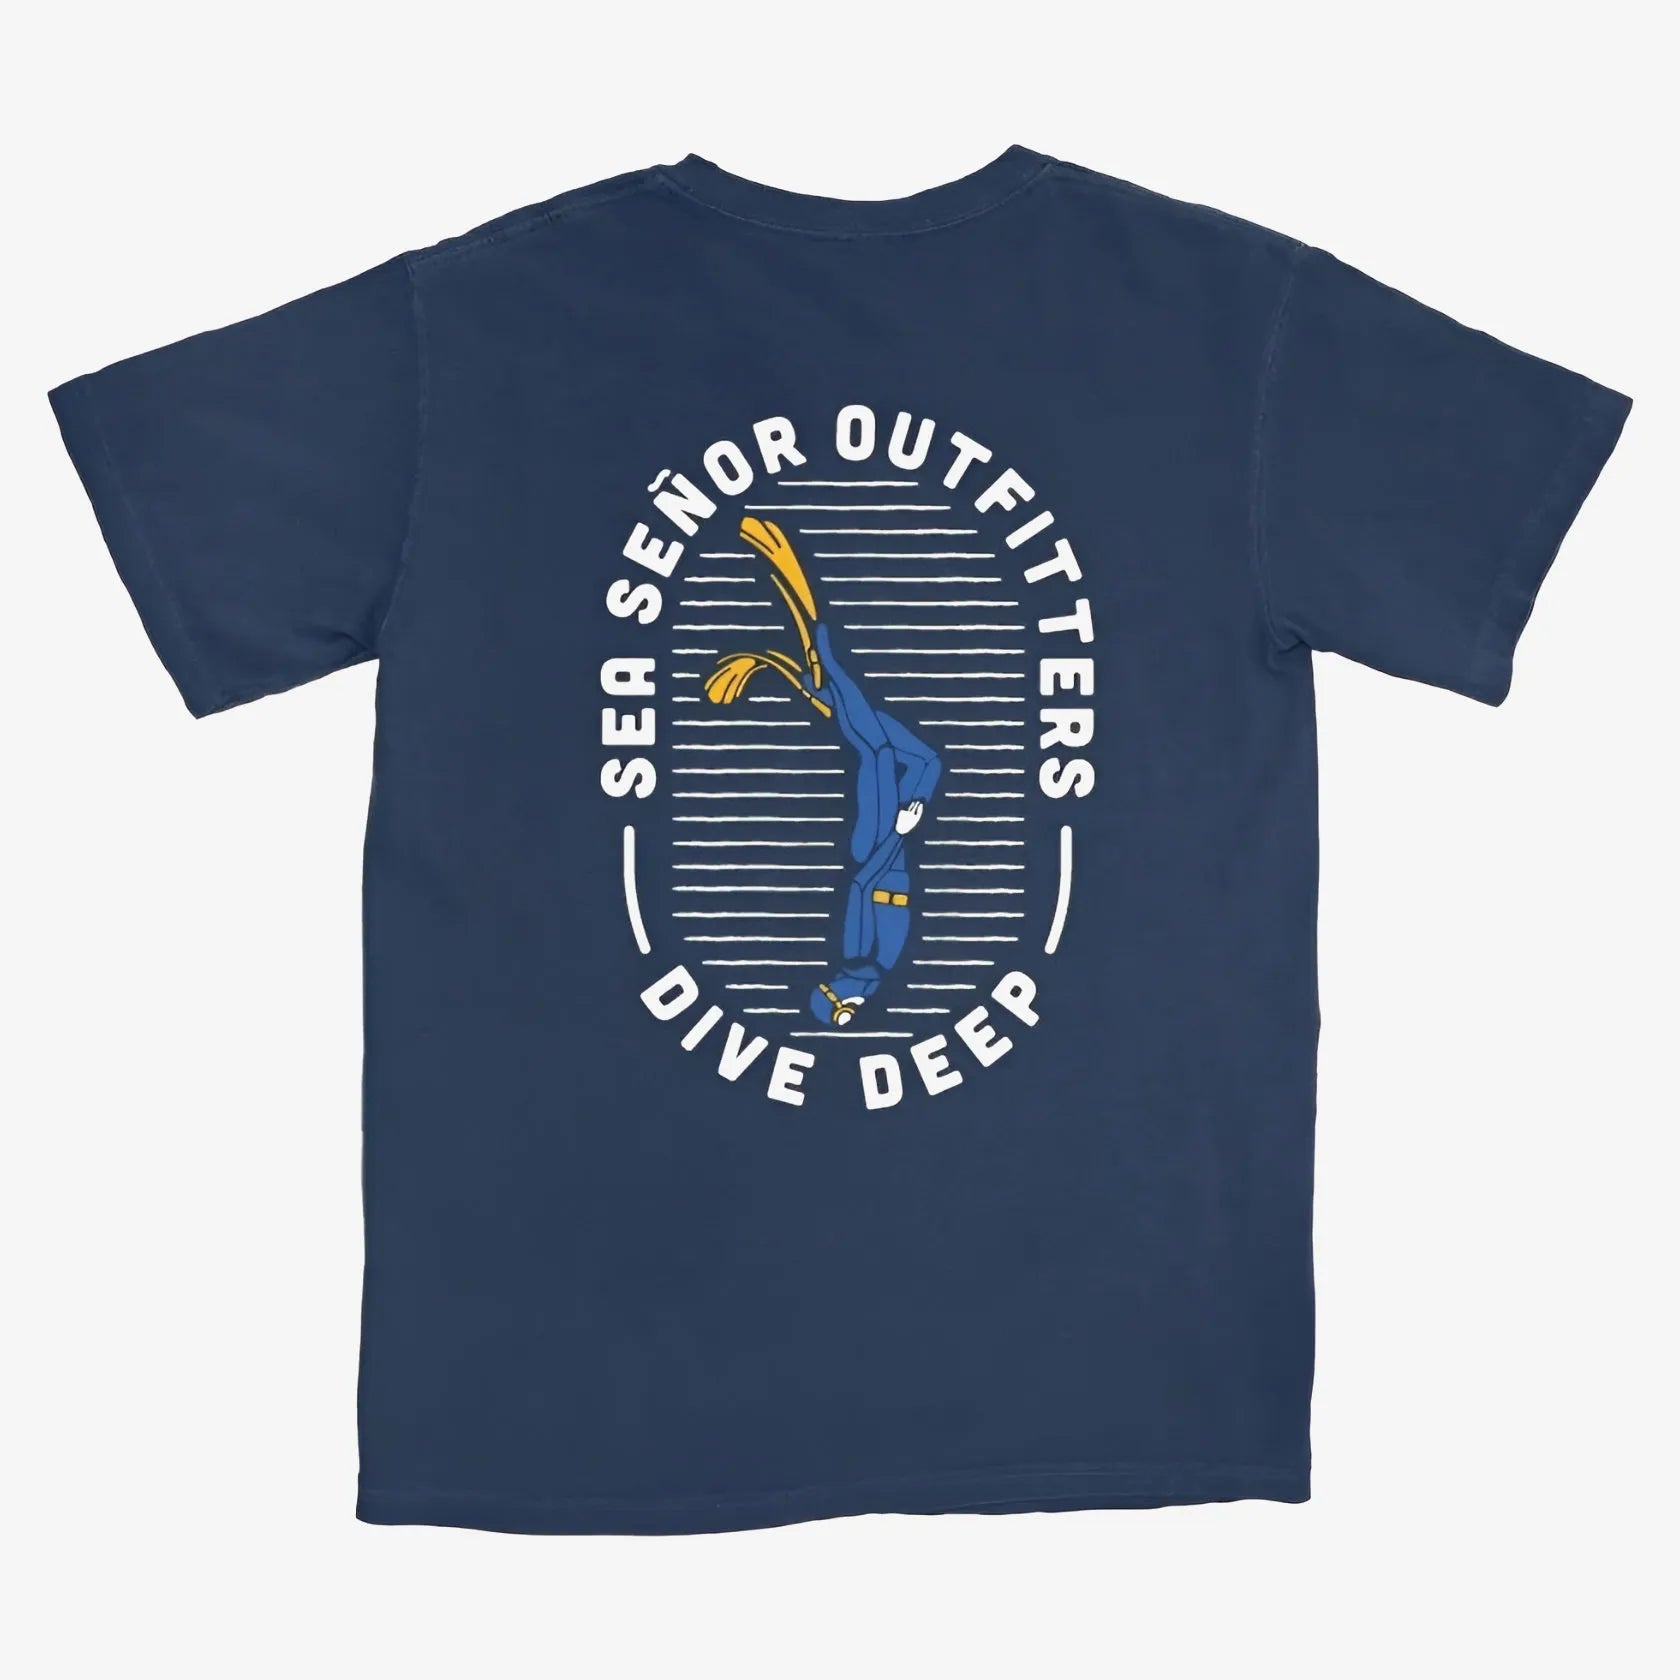 Dive Deep - Sea Señor Outfitters